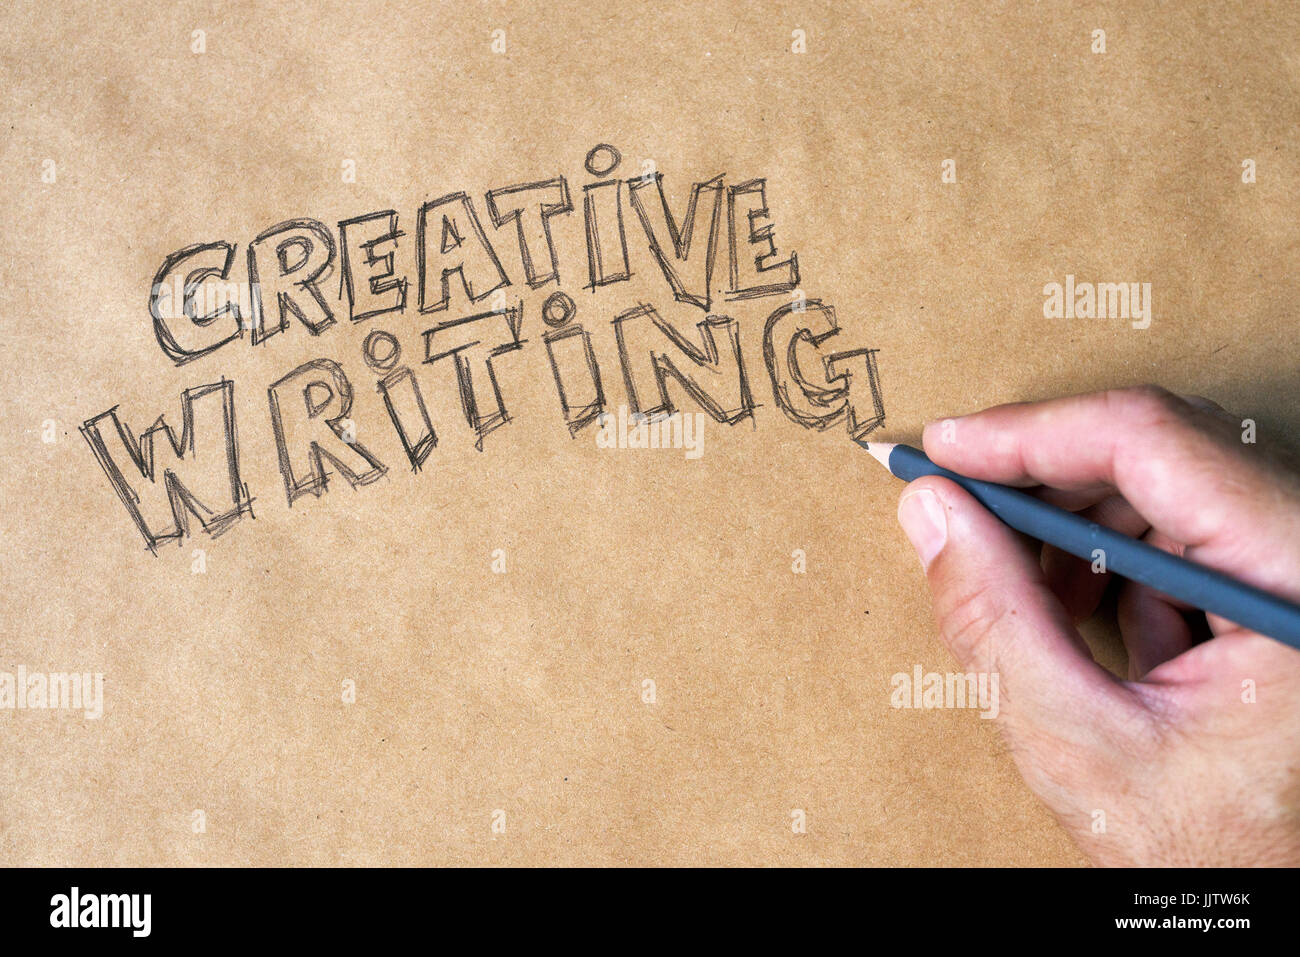 Creative writing, concept of learning and mastering creative process outside the bounds of normal professional, journalistic or academic literature Stock Photo